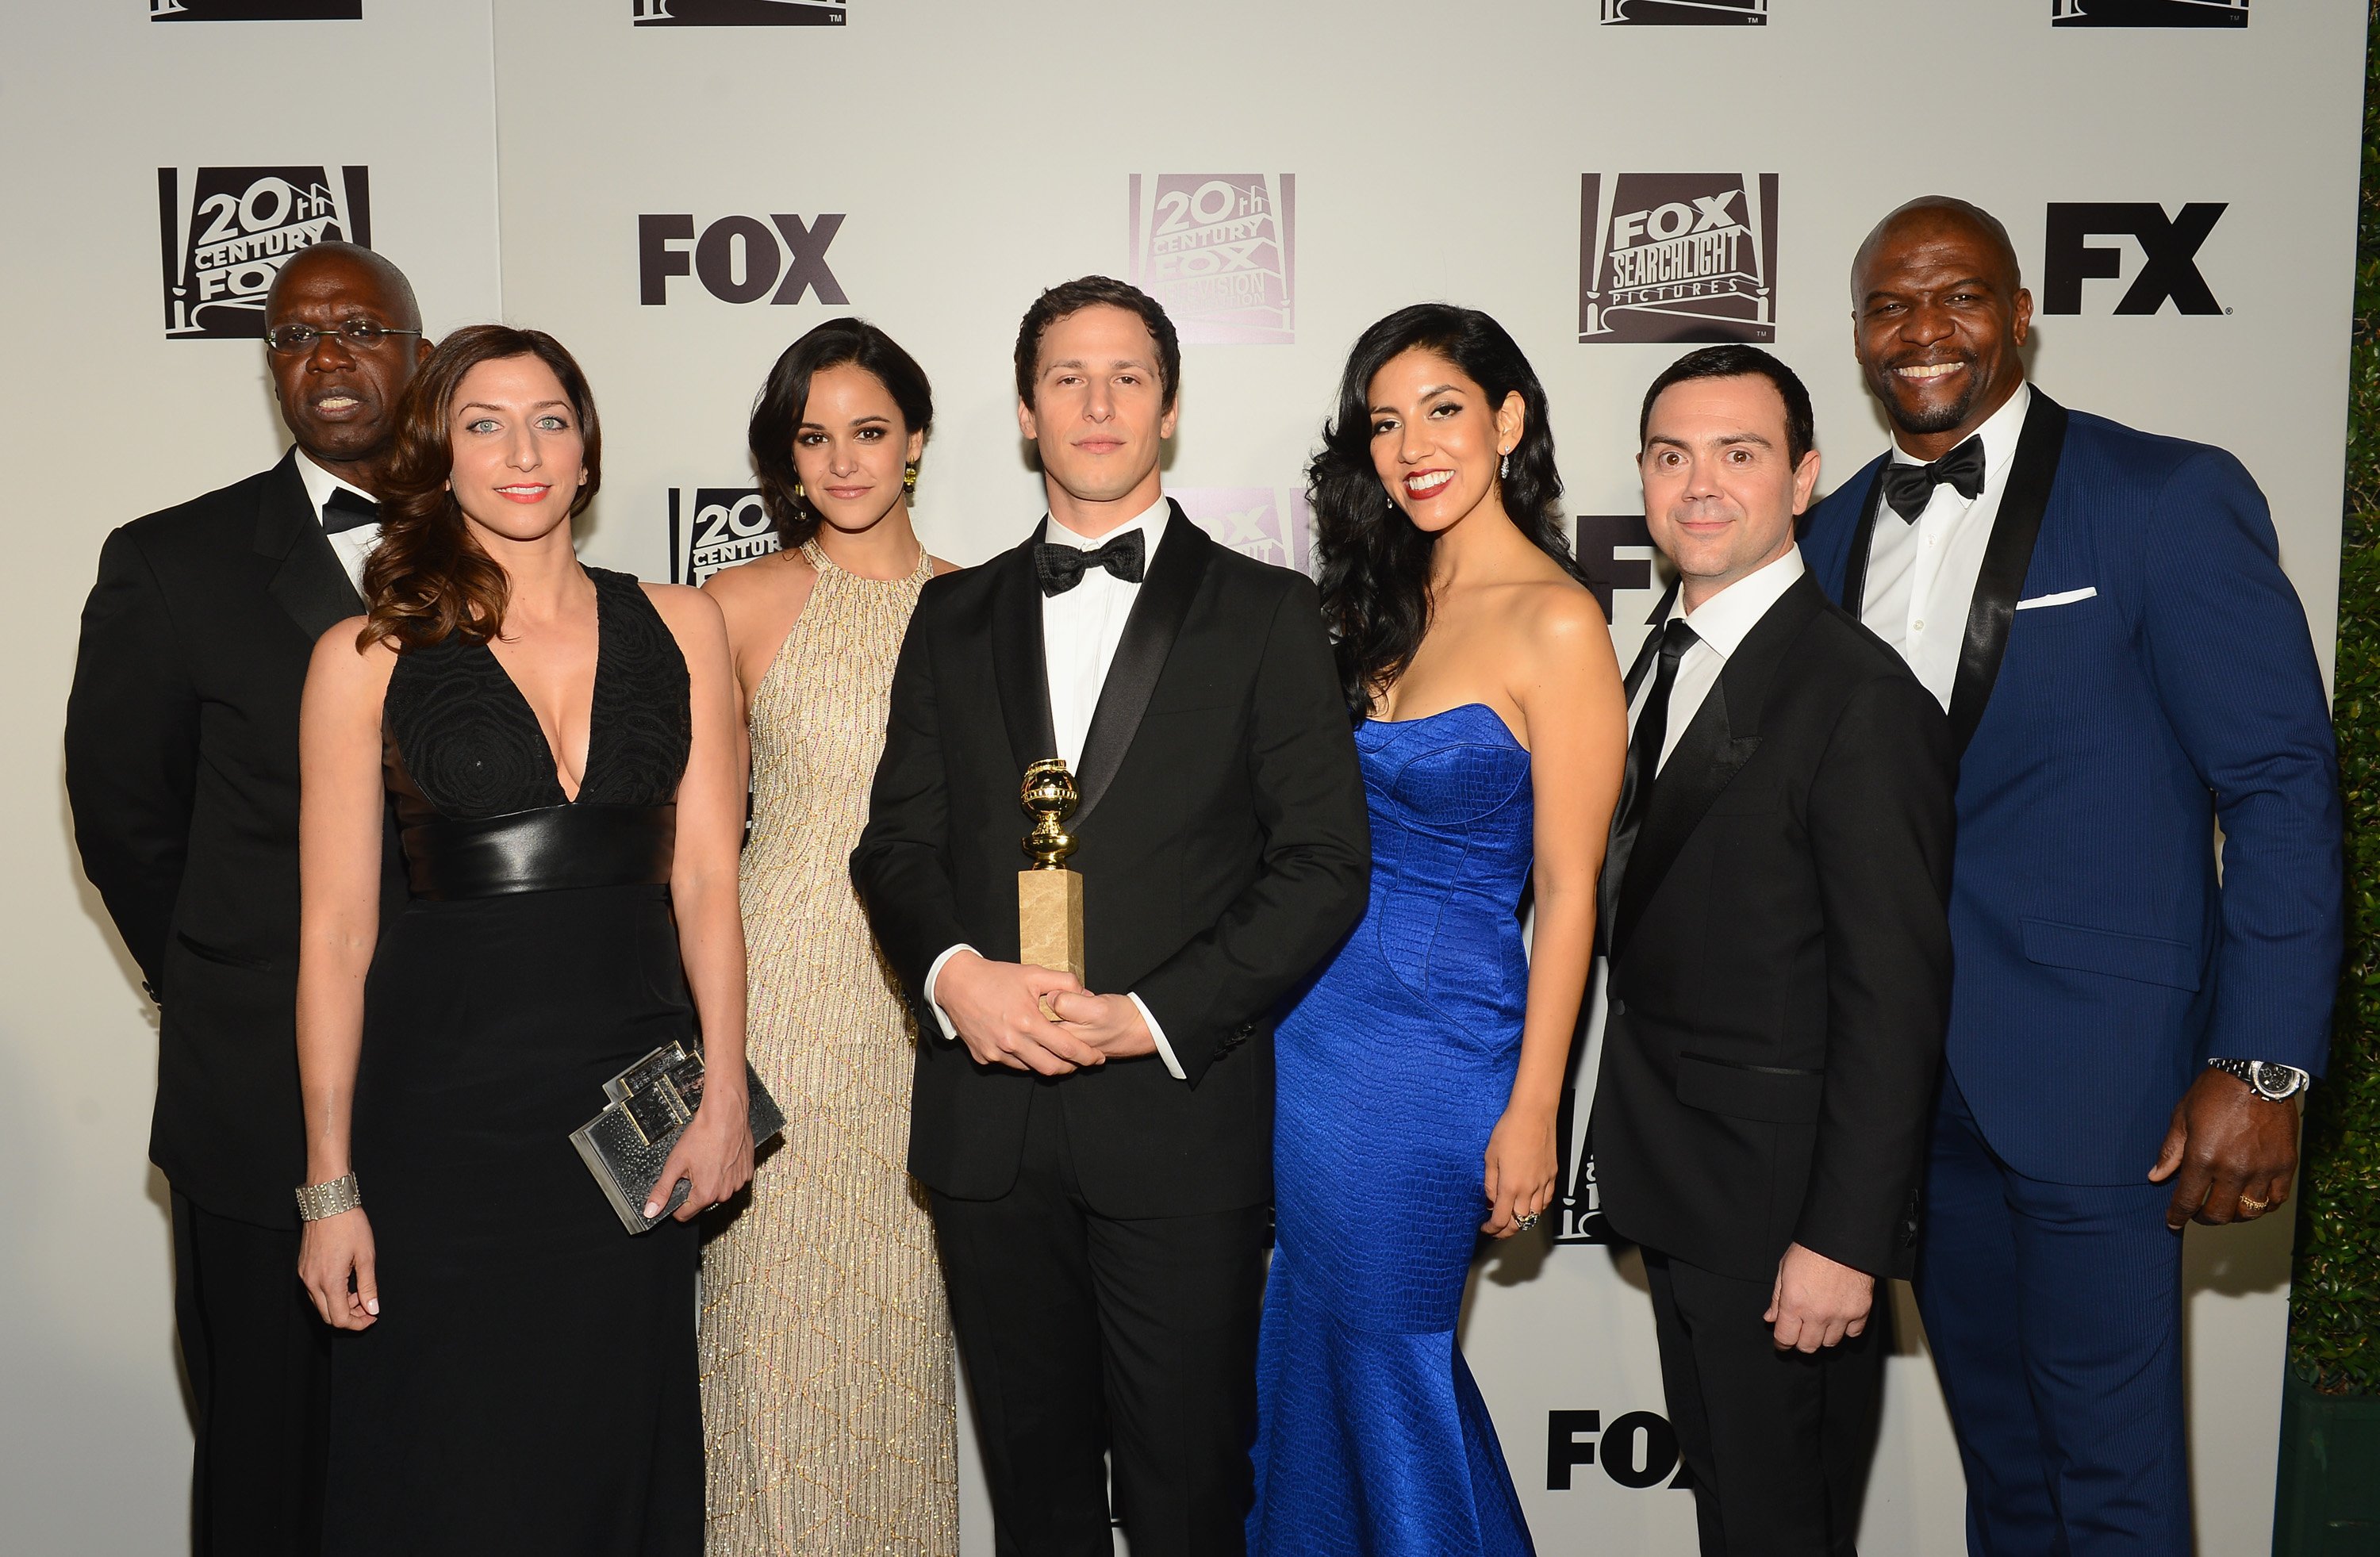 Andre Braugher, Chelsea Peretti, Melissa Fumero, Andy Samberg, Stephanie Beatriz, Joe Lo Truglio, and Terry Crews from the cast of 'Brooklyn Nine-Nine' attend the Fox And FX's 2014 Golden Globe Awards Party on January 12, 2014 in Beverly Hills, California | Photo: Getty Images